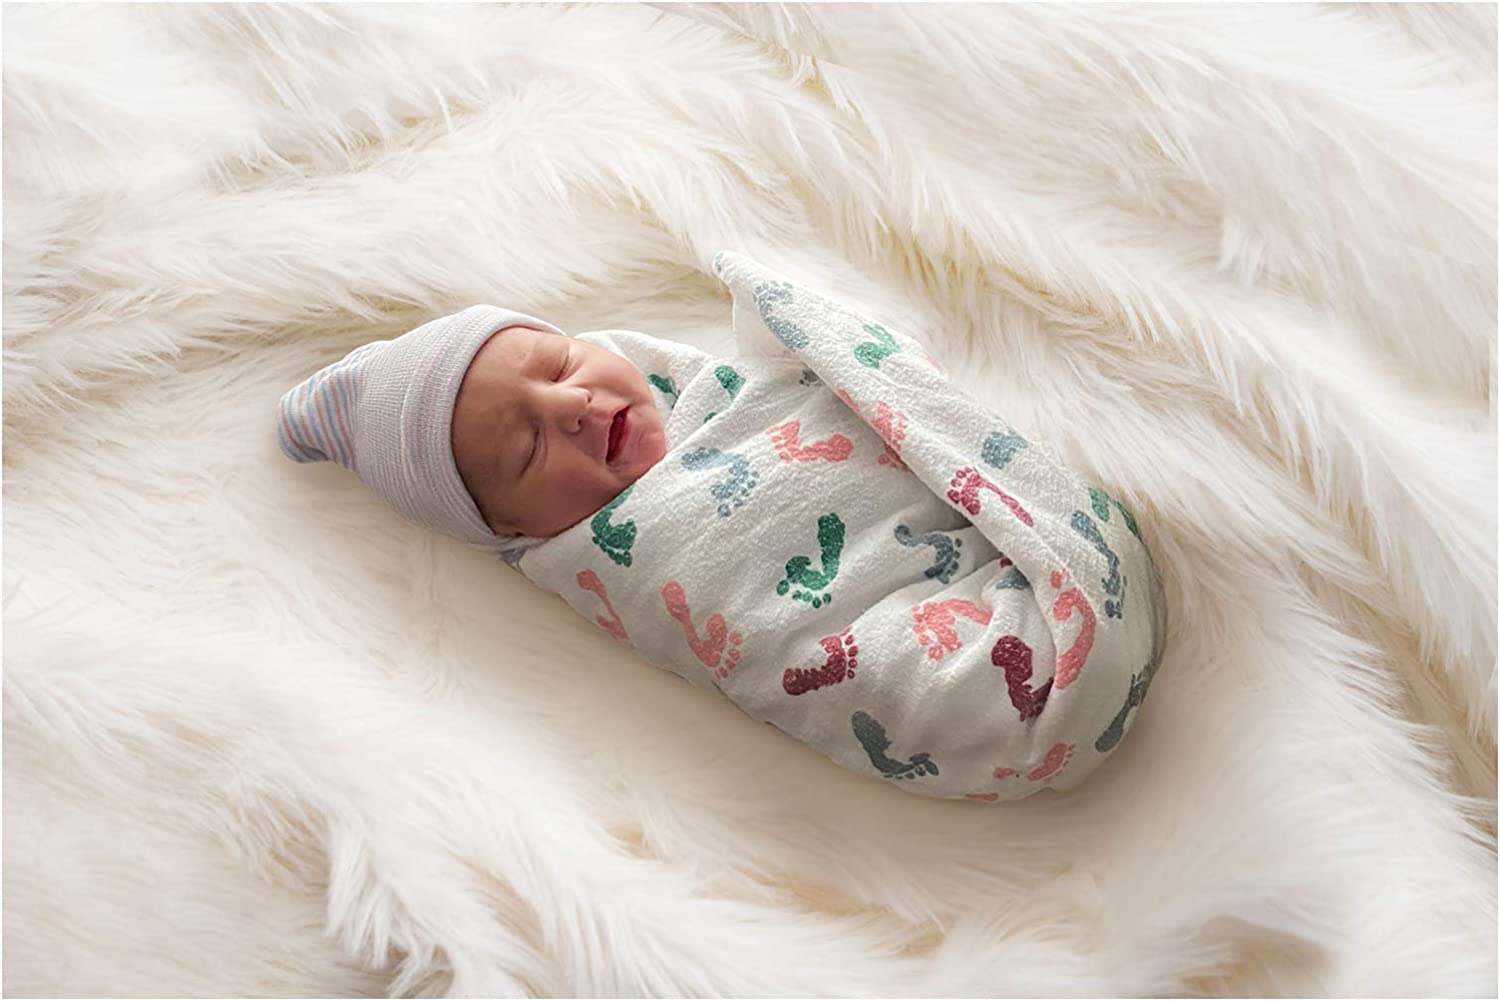 Baby Hospital Receiving Swaddle Blankets for Newborn Babies - Original Baby Footprint Design Breathable 100% Cotton - Durable Hospital Quality - Generous Size